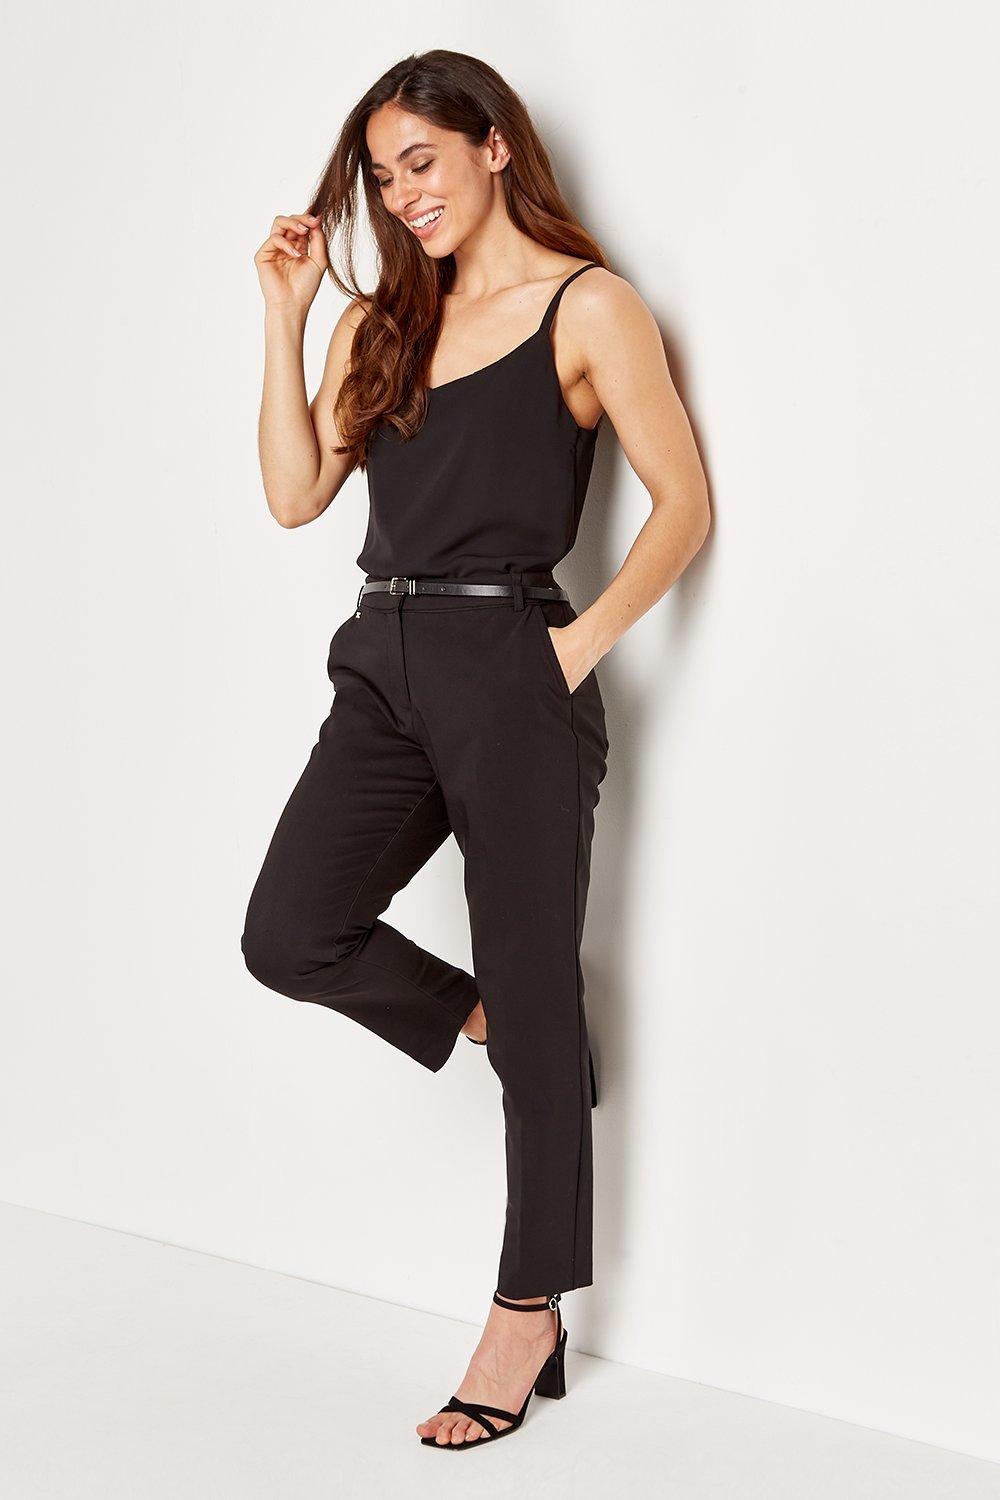 The Stylish Trousers To Add To Your Collection. A Sleek Black Hue Keeps These Sophisticated And Easy To Pair, Whilst A Belted Waist And Cigarette Cut Keeps Them Timeless And Flattering. Dress Them Up For The Evening By Teaming With A Printed Blouse And He